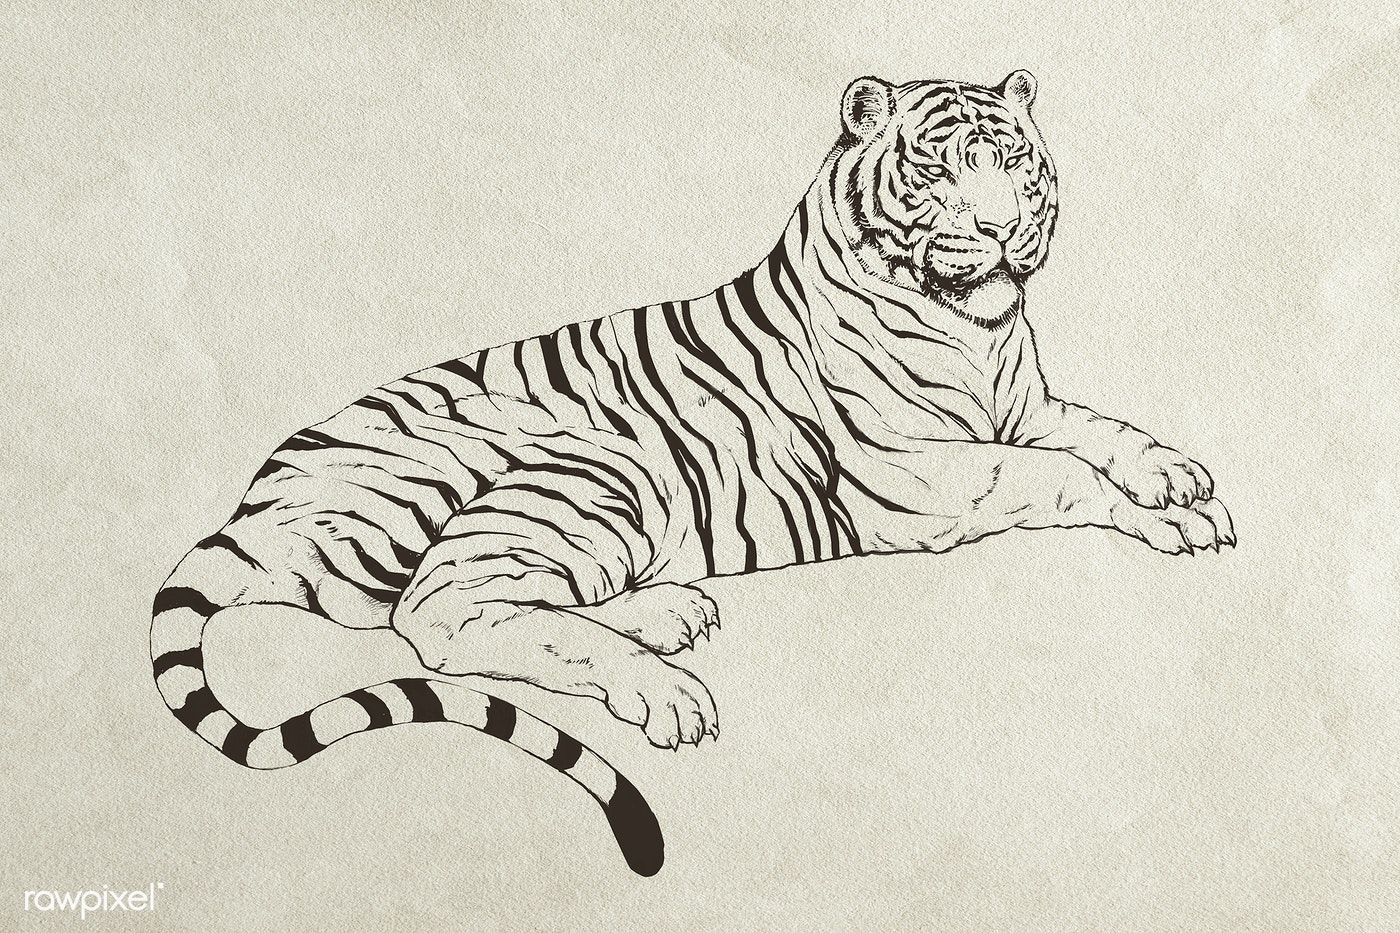 How To Draw Tiger Sitting Down